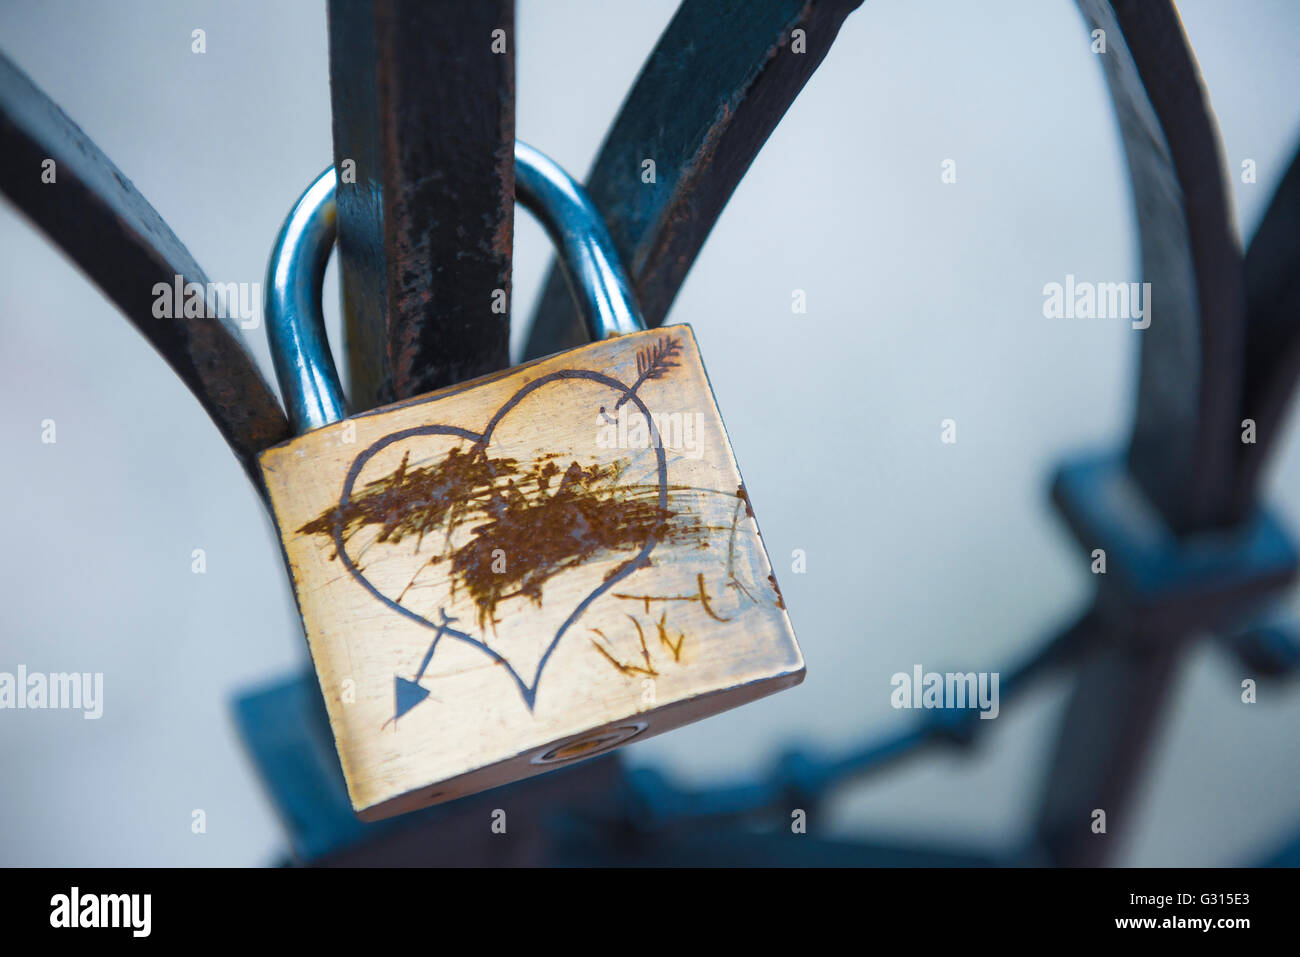 Break up, view of a 'love lock' with its lovers' names scratched out, implying the break up of a relationship, Budapest, Hungary. Stock Photo